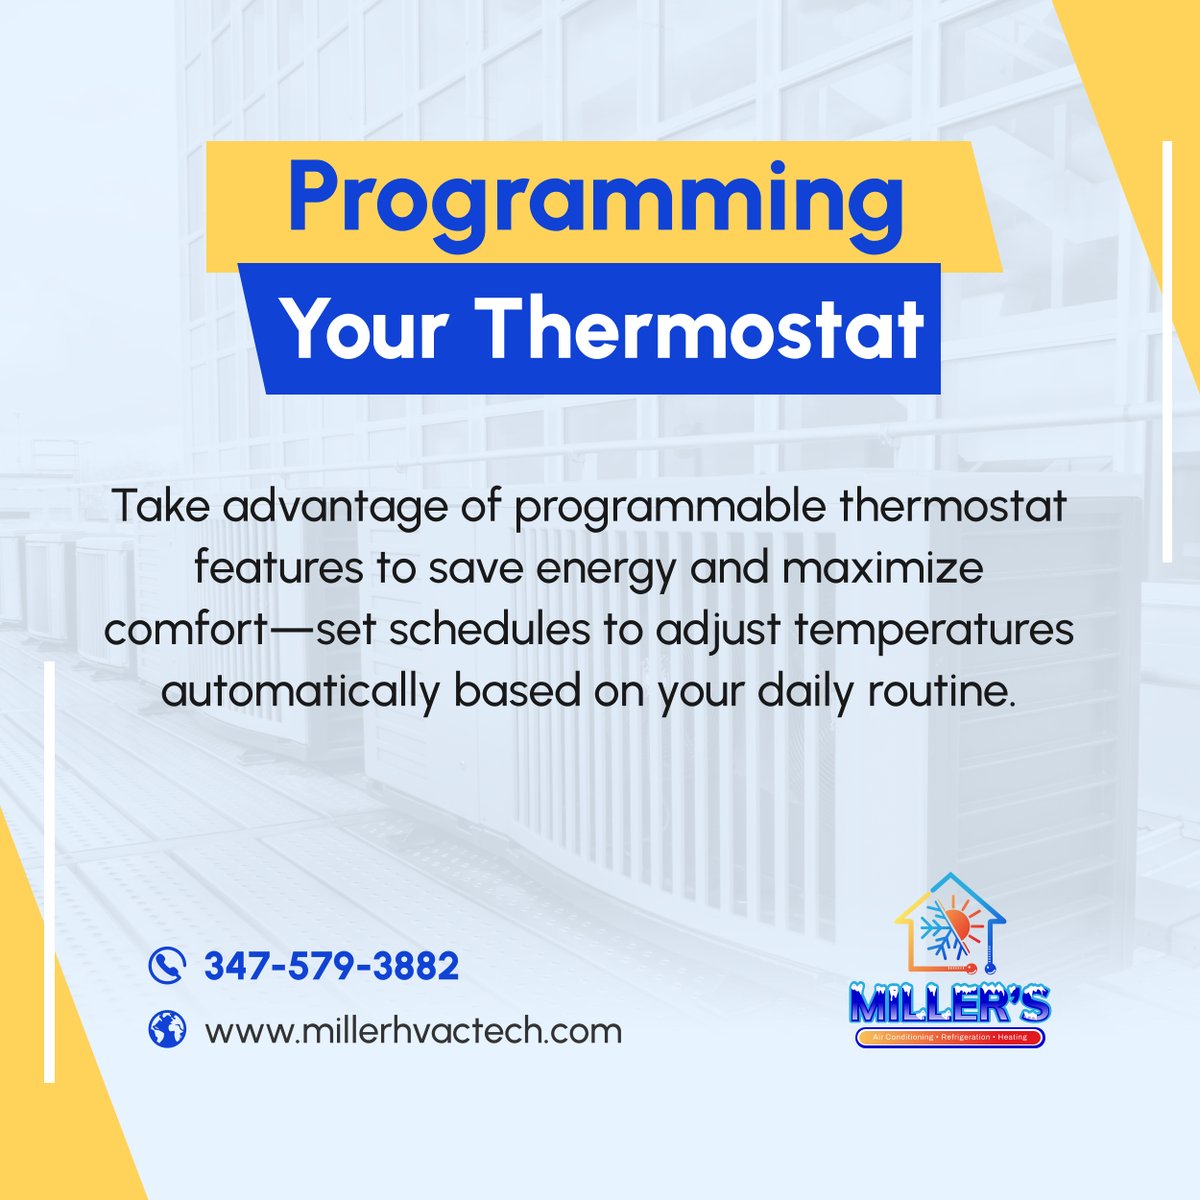 Learn how to program your thermostat for optimal comfort and efficiency. 

Simplify your life and save on energy costs with smart temperature control! 

#BrooklynNY #HVACServices #ThermostatTips